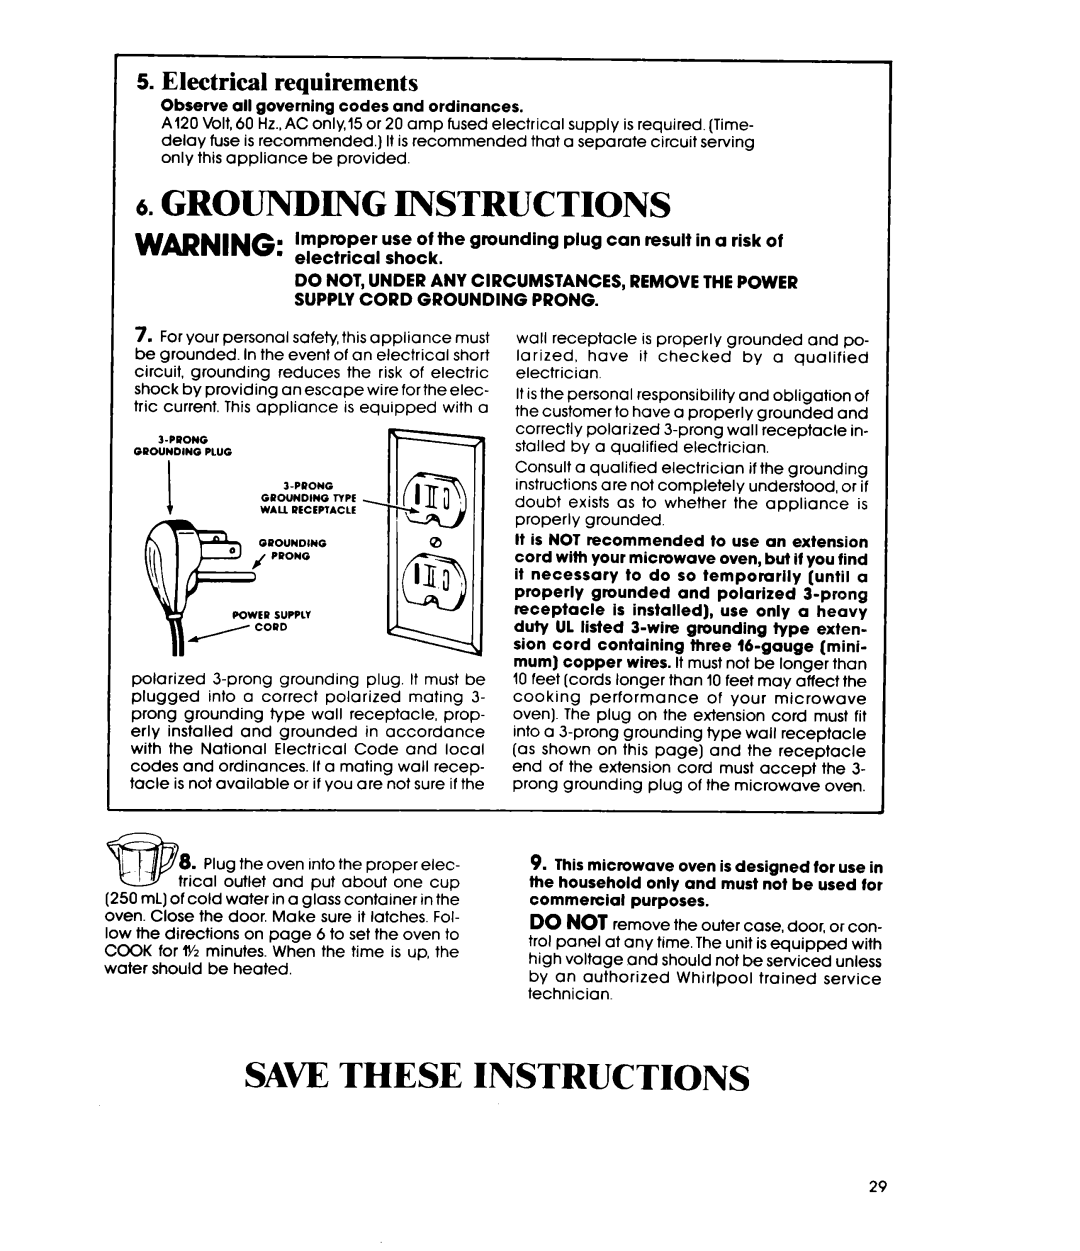 Whirlpool MW88OOXR manual Grounding Instructions, Save These Instructions, Electrical requirements 